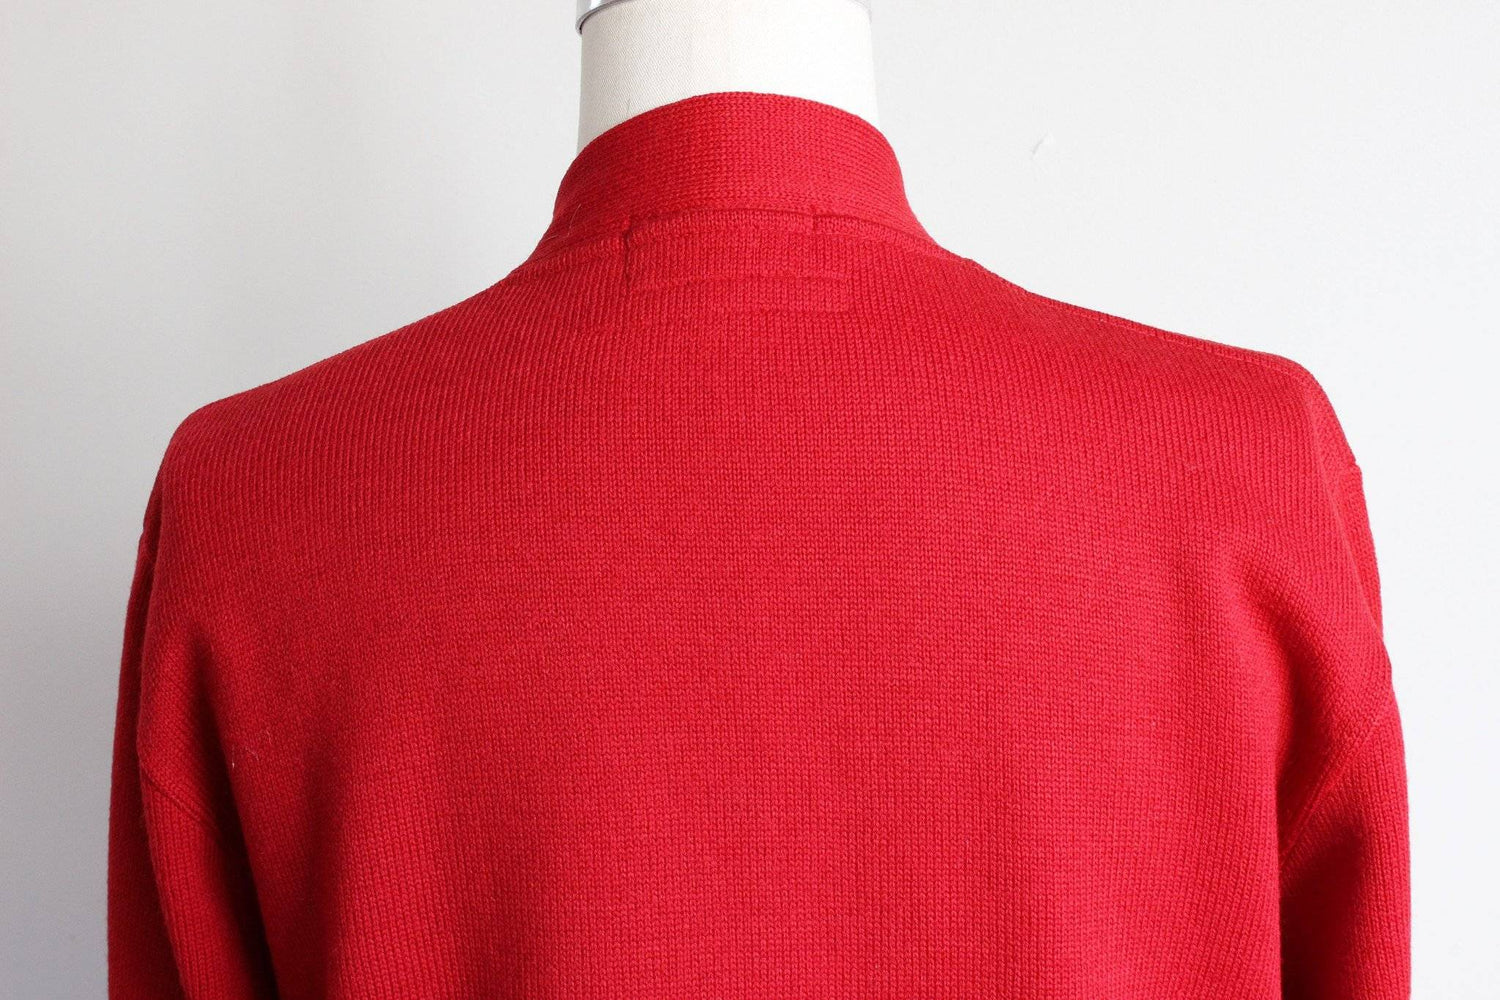 Vintage 1950s Red Criterion Class Sweater-Toadstool Farm Vintage-100 Percent,100% Virgin Wool,1950s Red Sweater,Class Sweater,Collegiate Cardigan,Criterior Class Sweater,Vintage,Vintage Clothing